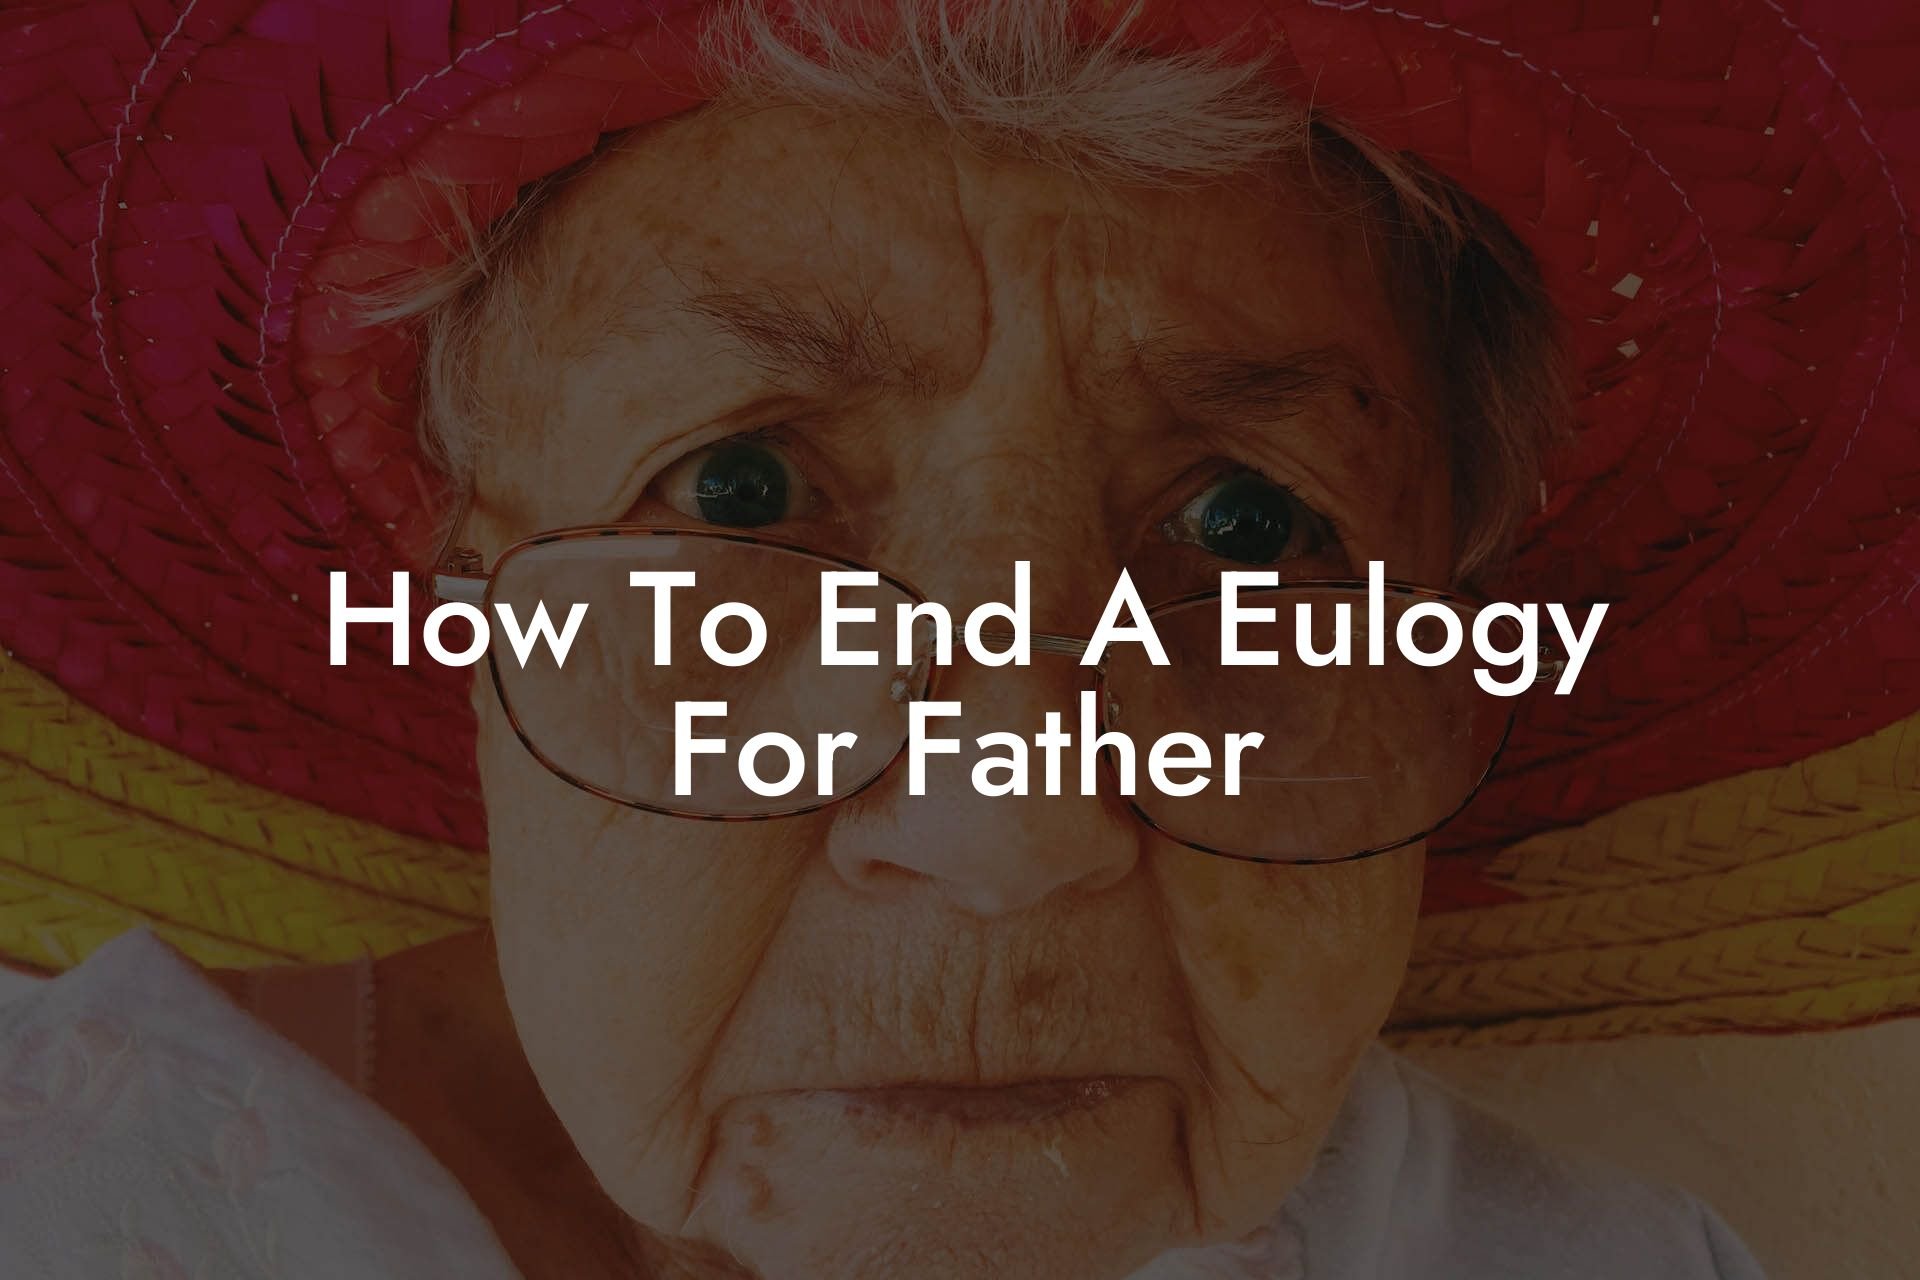 How To End A Eulogy For Father